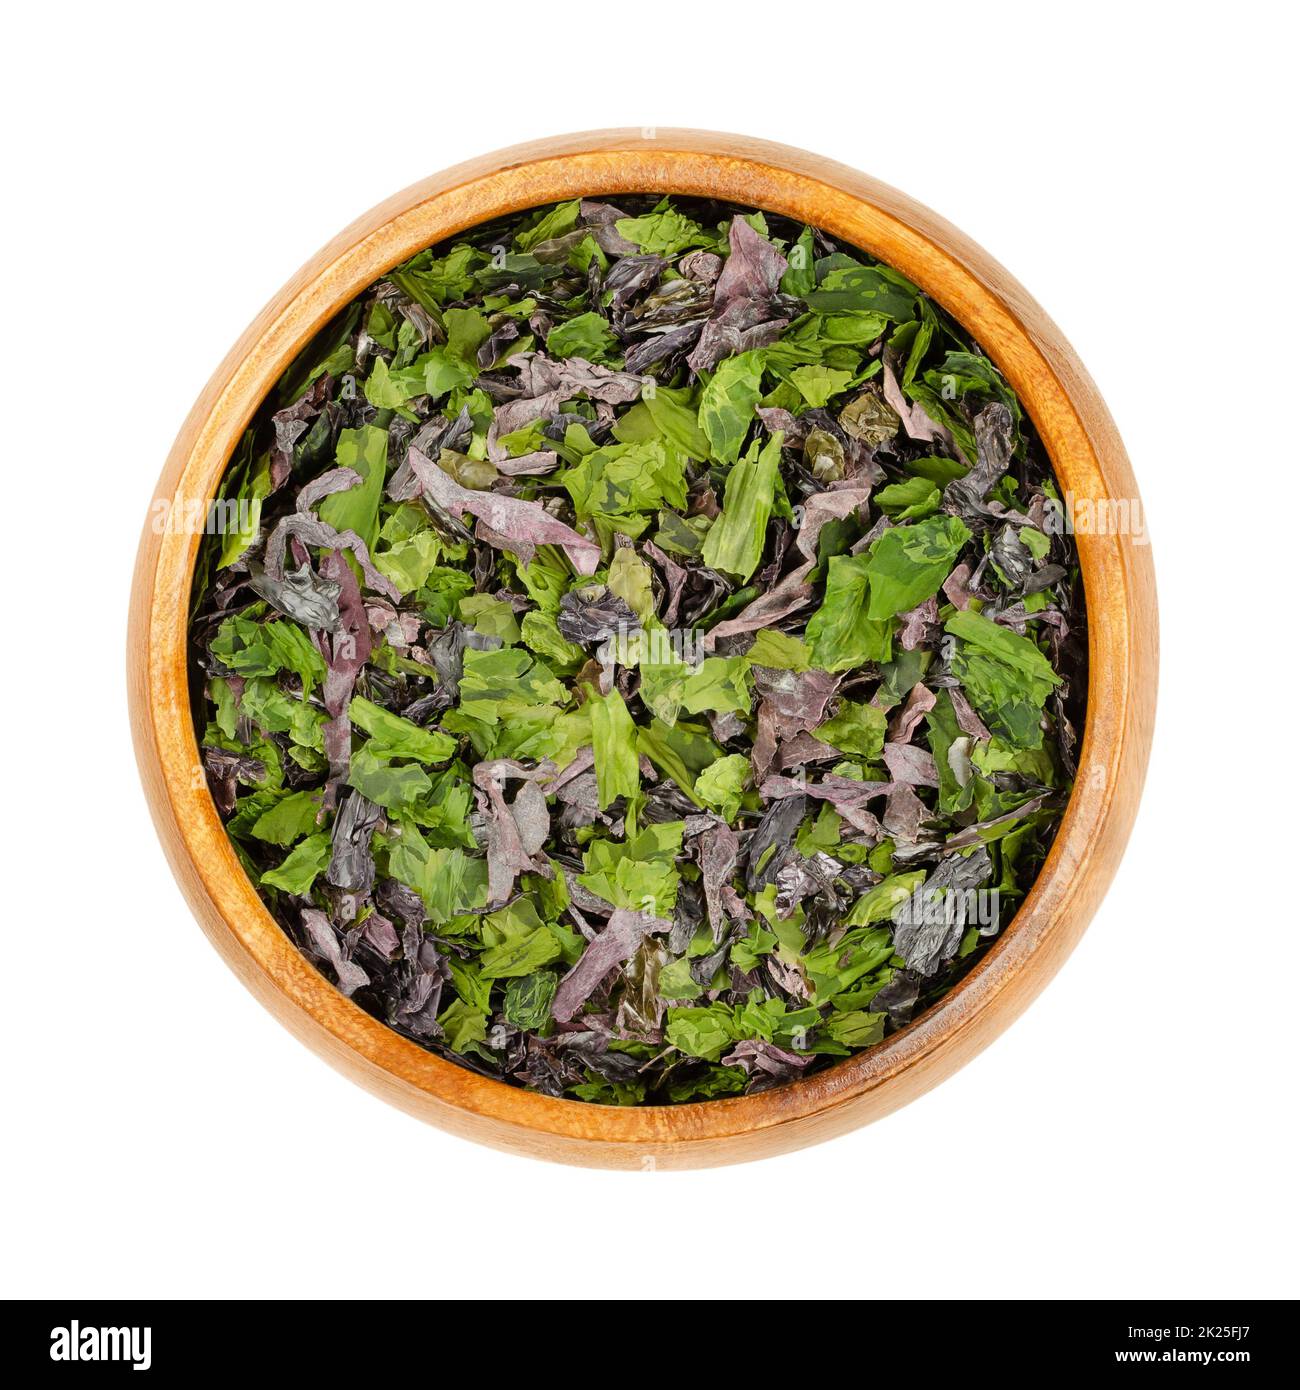 Seaweed flakes, mix of dulse, sea lettuce and nori, in wooden bowl Stock Photo